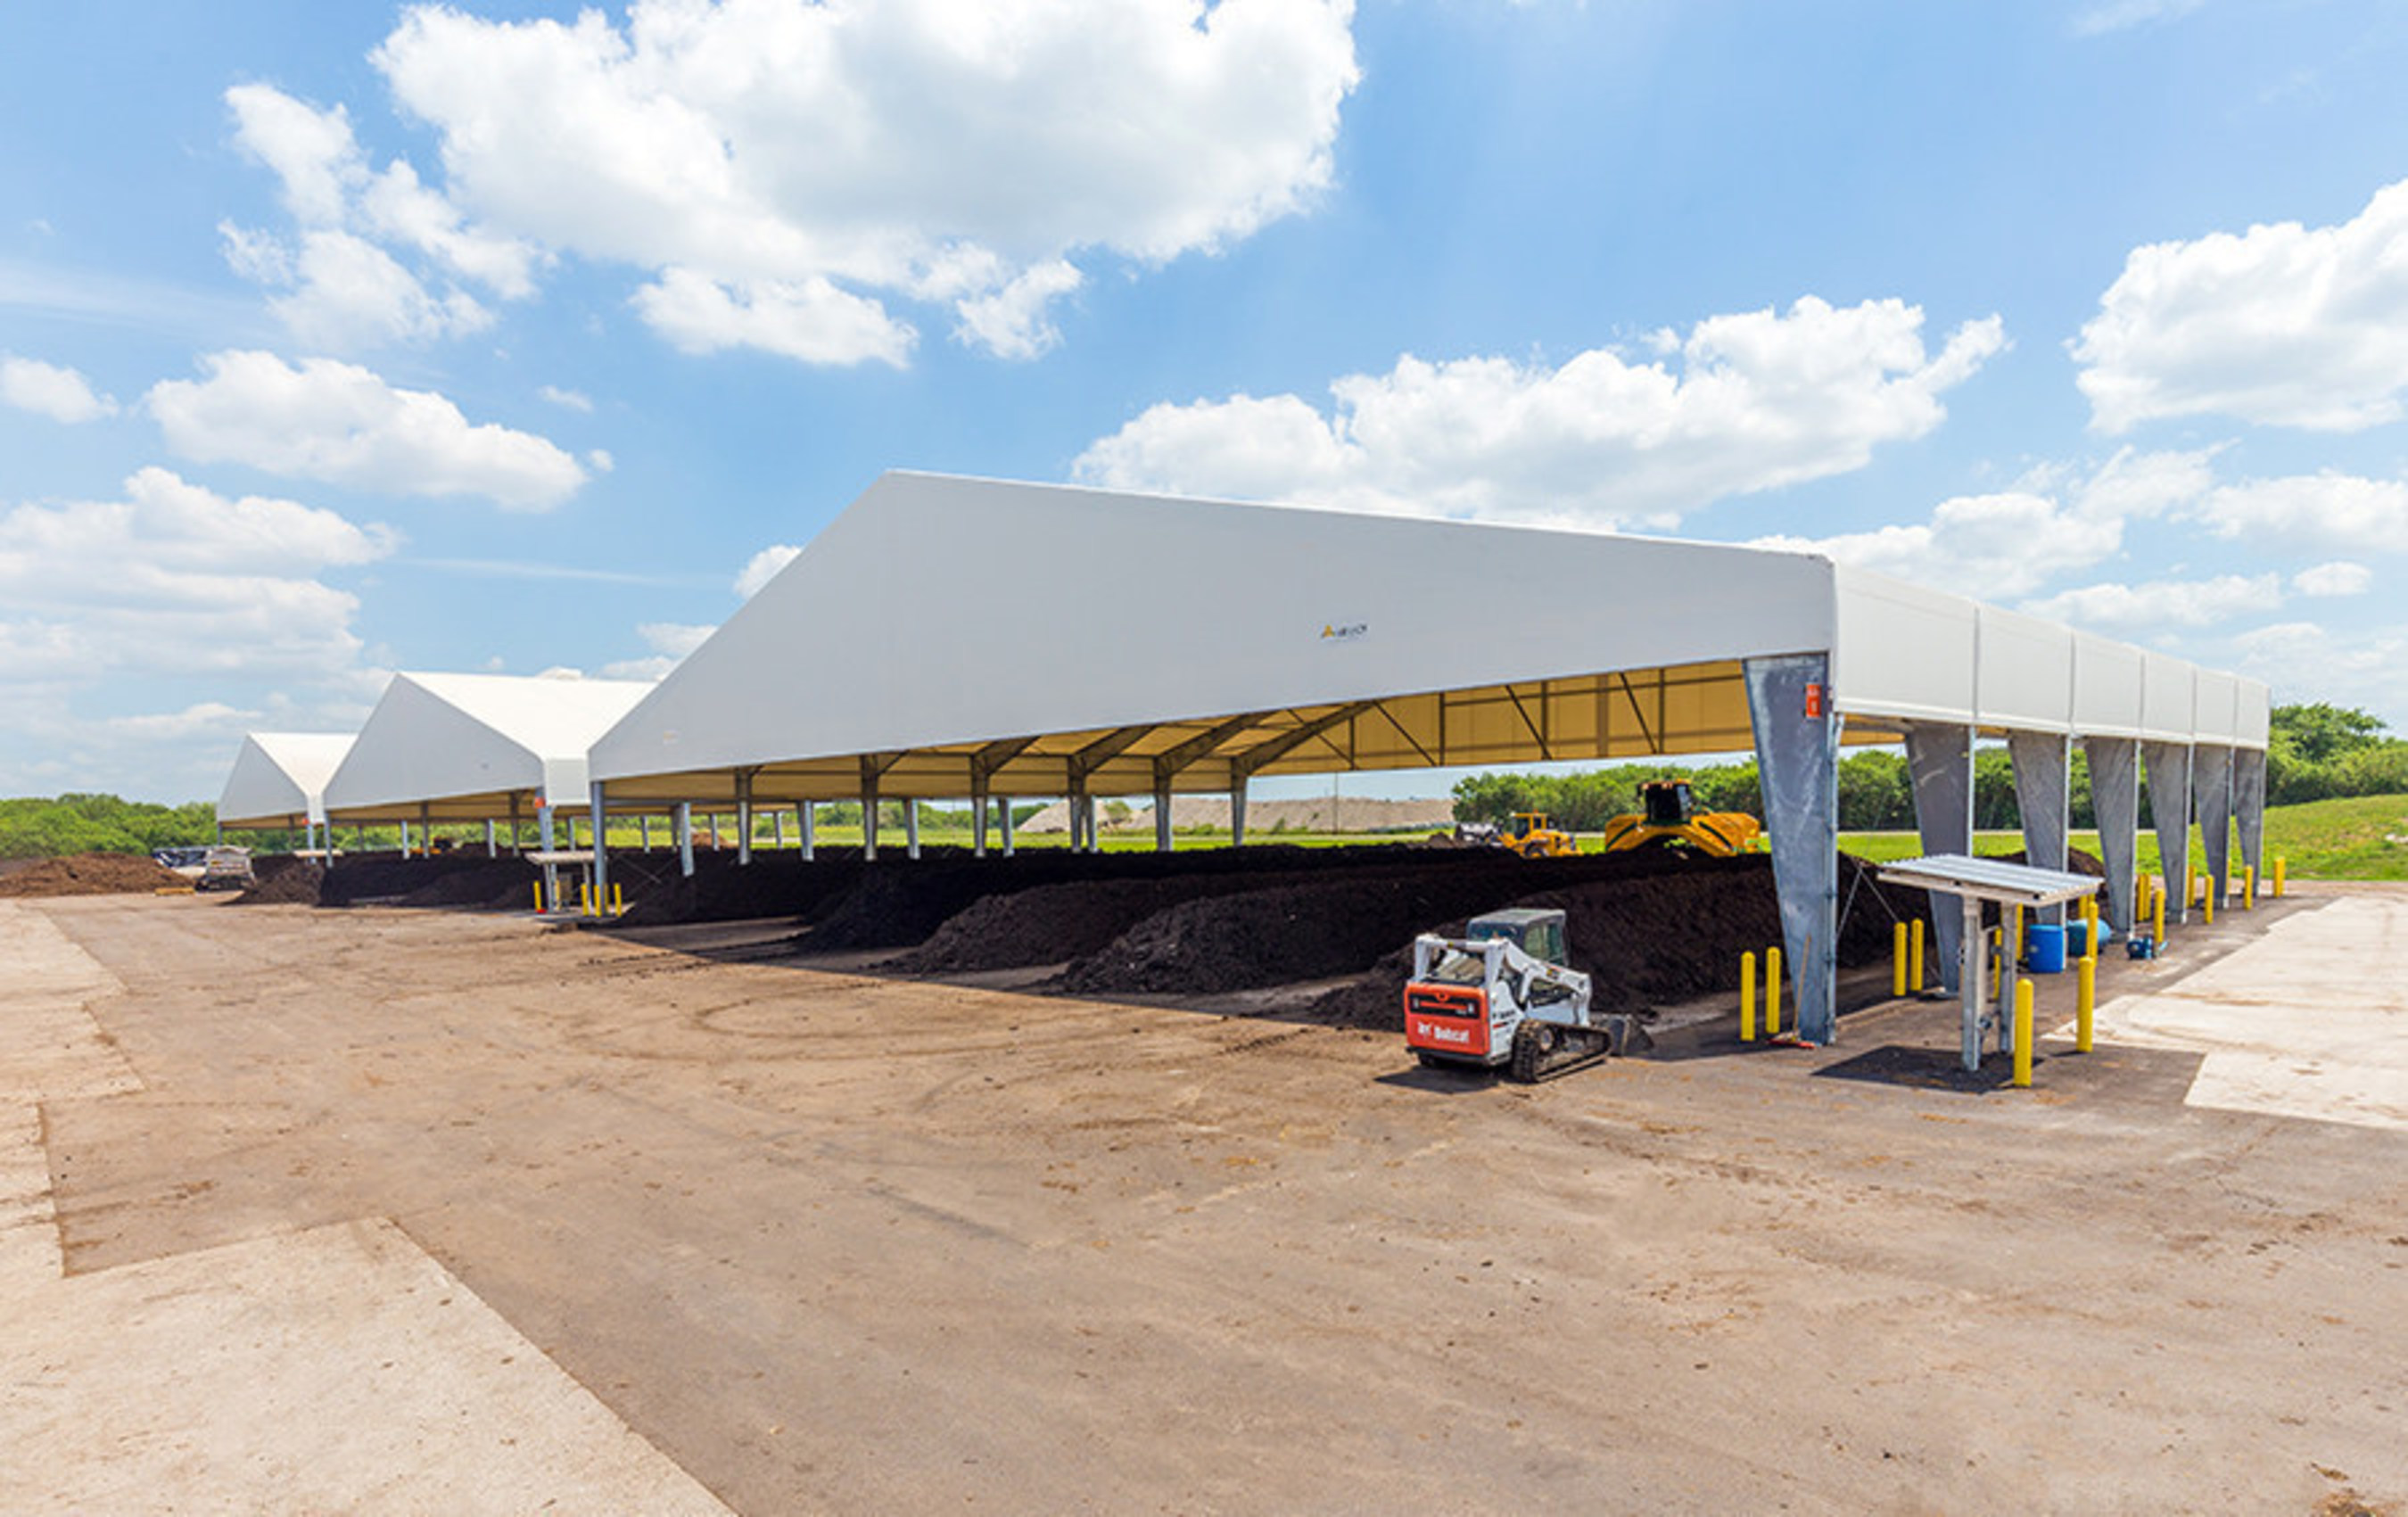 One key advantage of a Legacy fabric structure is that the translucent fabric allows light to enter the building through the roof, saving energy costs by eliminating the need for artificial lighting during daylight hours.